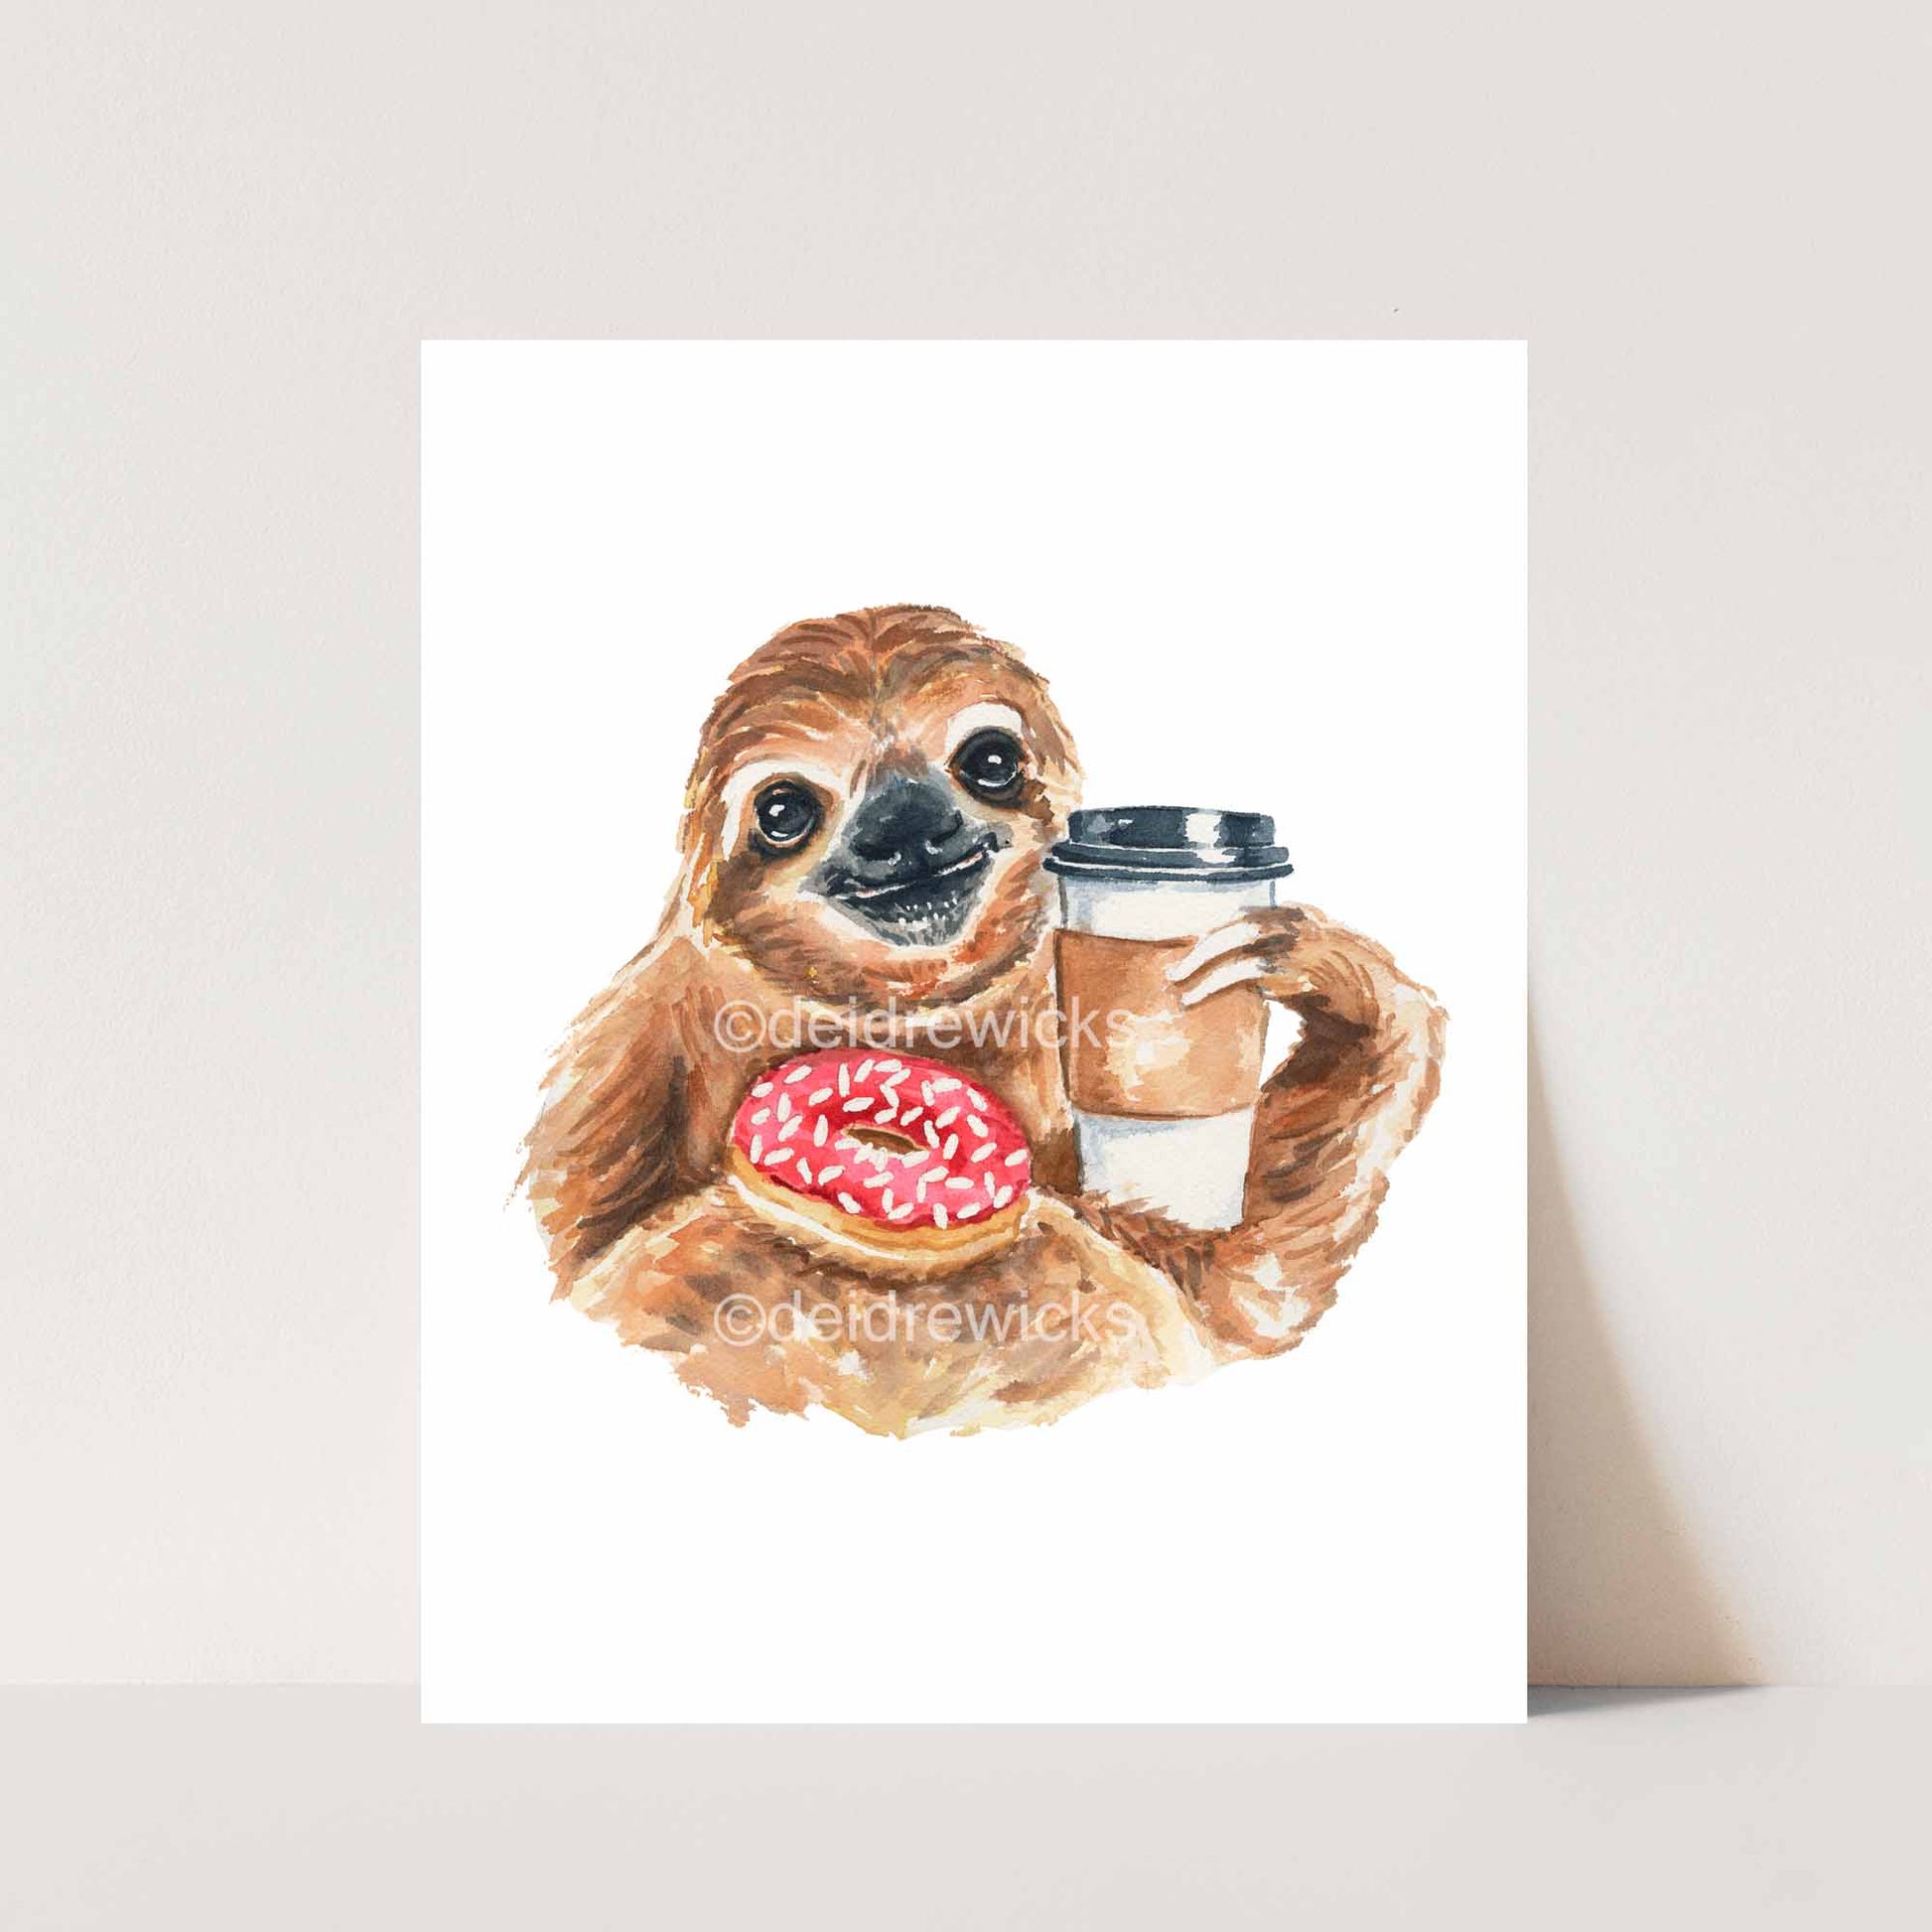 Watercolor print of a sloth drinking coffee and holding a donut on it's stomach